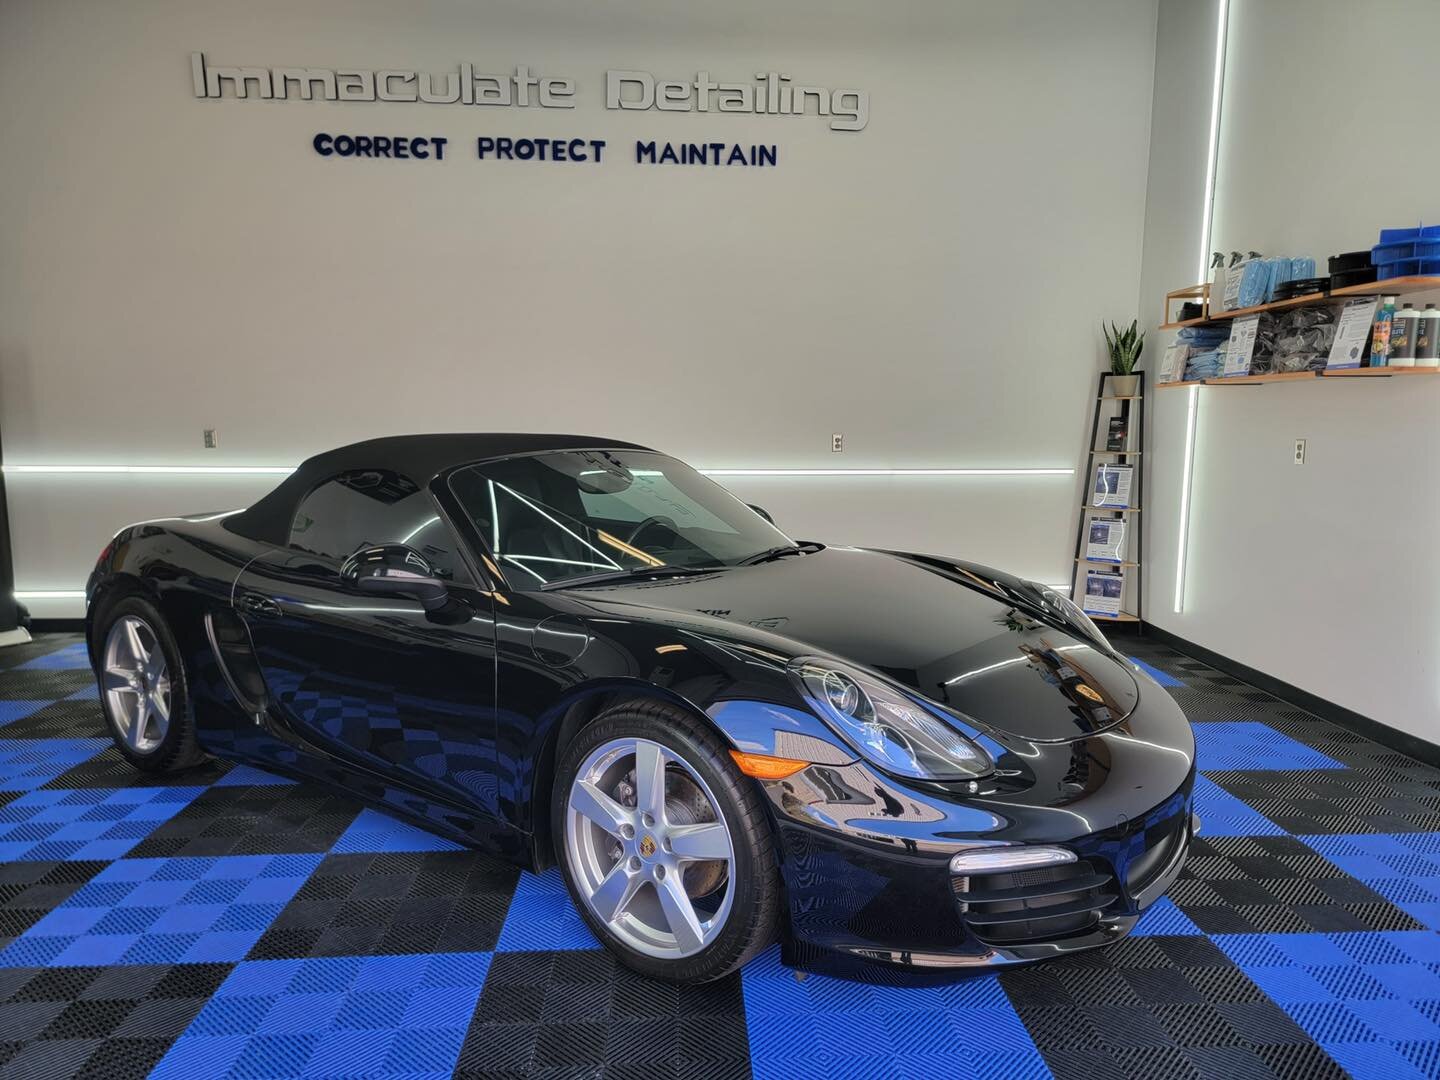 The 2016 Porsche Boxster is a sleek and stylish sports car that delivers impressive performance and handling. Powered by a mid-mounted 2.7-liter flat-six engine, the Boxster produces 265 horsepower and 206 lb-ft of torque, which allows it to go from 